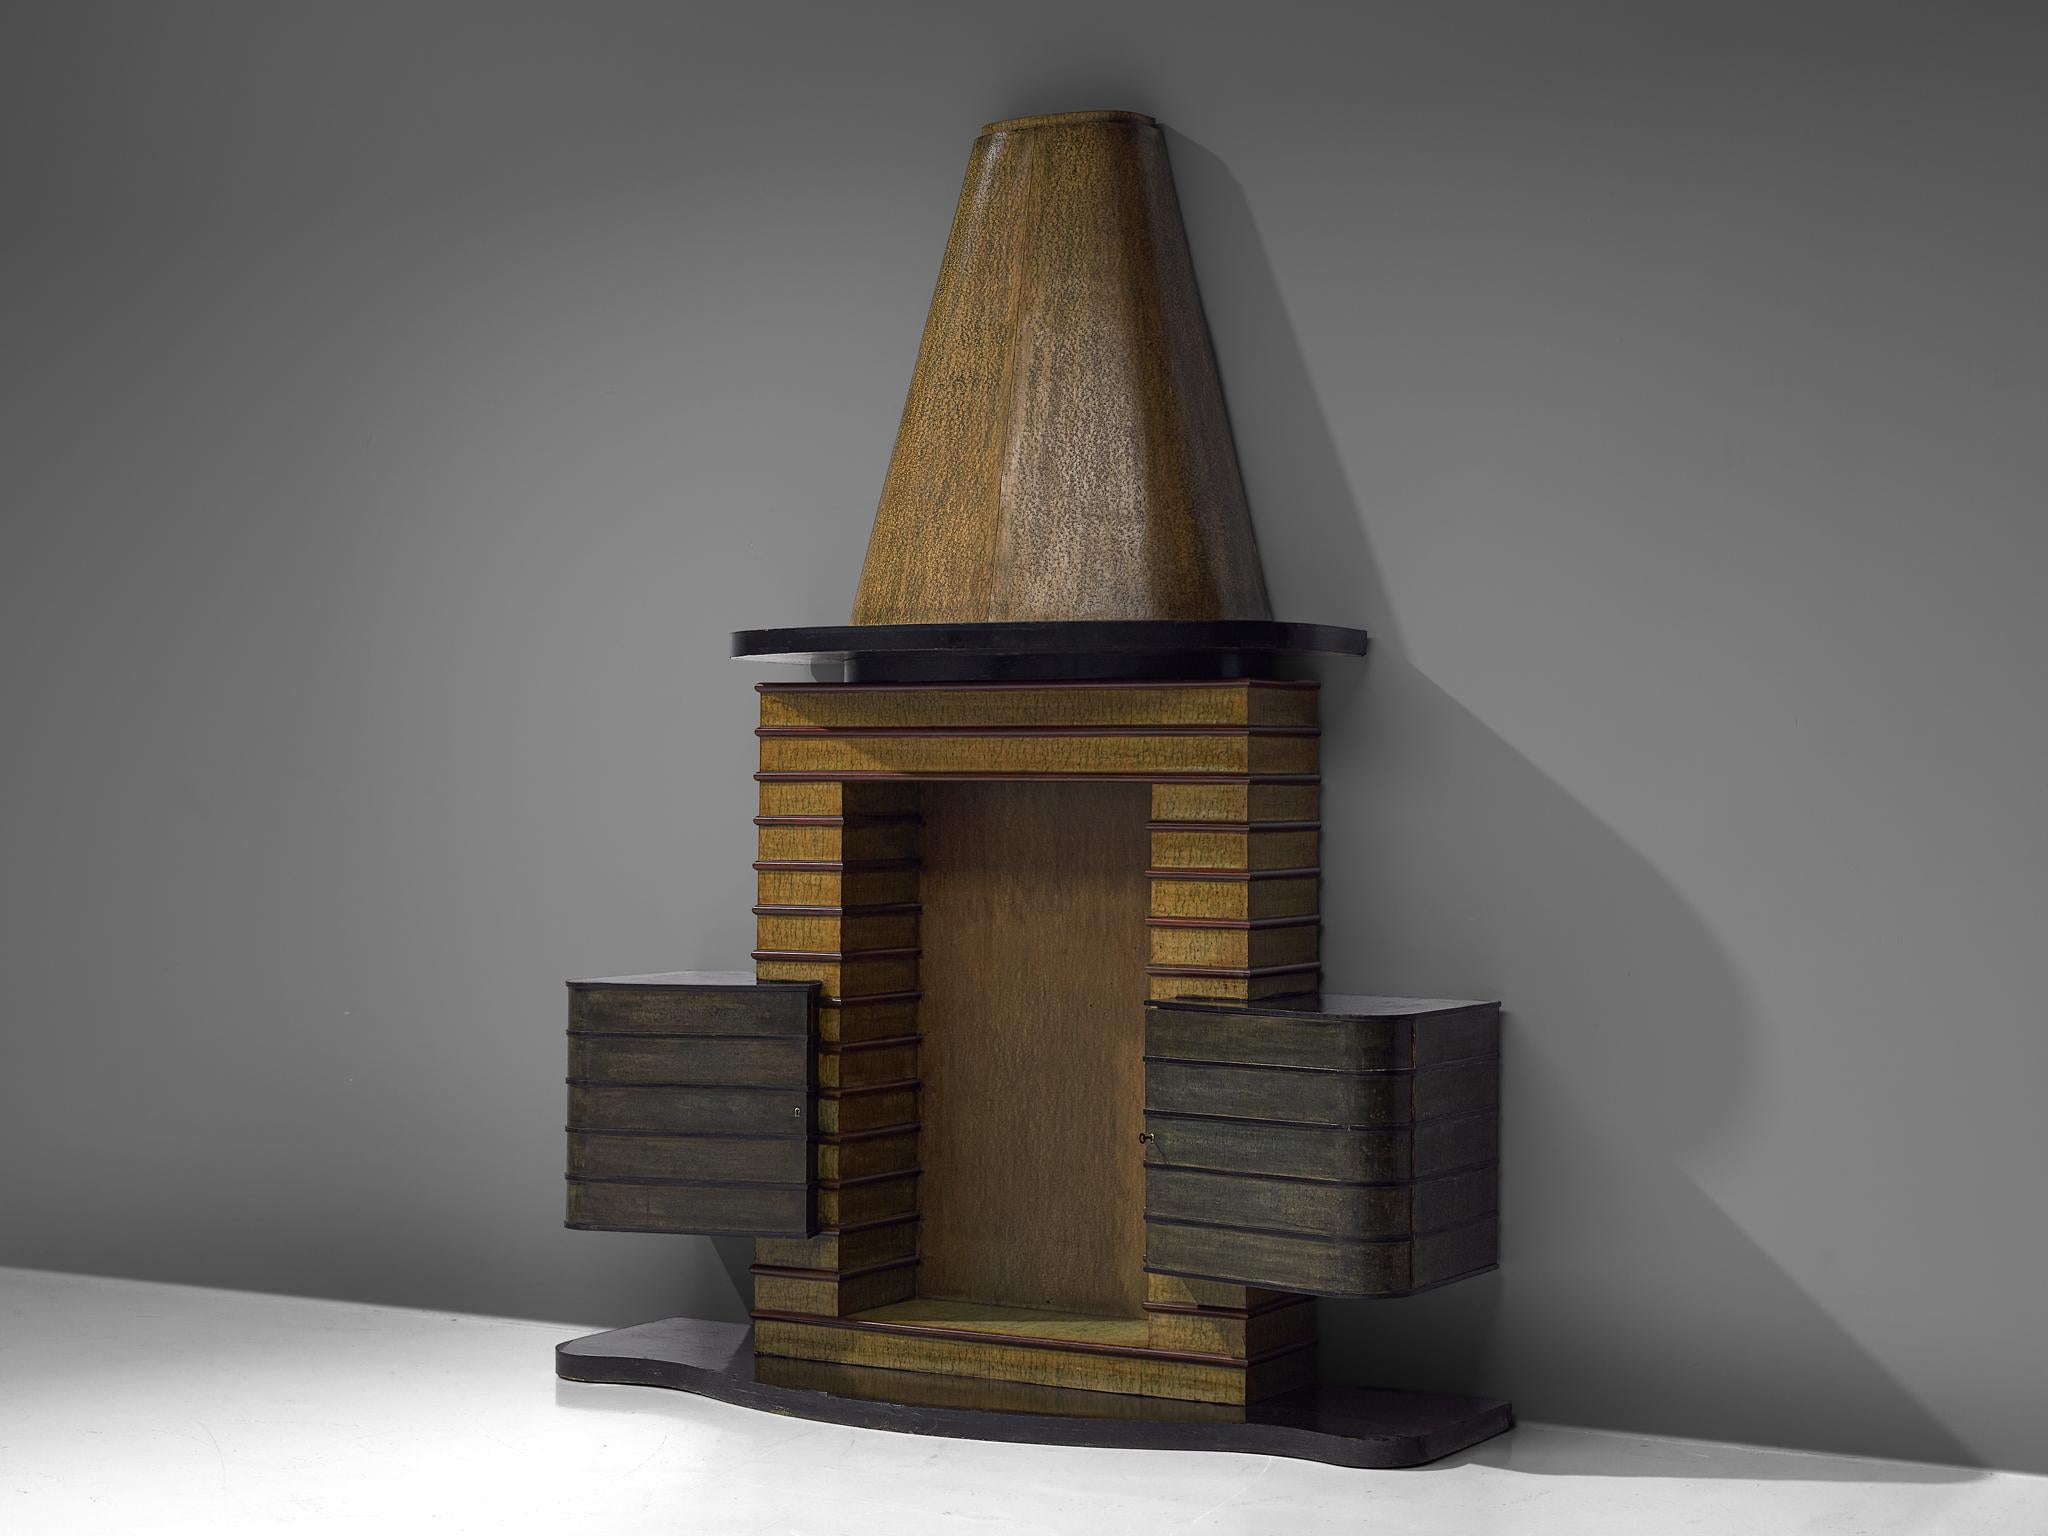 Vittorio Valabrega, bar cabinet, wood, Italy, 1930s

A bar cabinet by the Italian artist and designer Vittorio Valabrega from the 1930s. The cabinet features an organic shaped base in black lacquer. The storage area consists of three elements, one